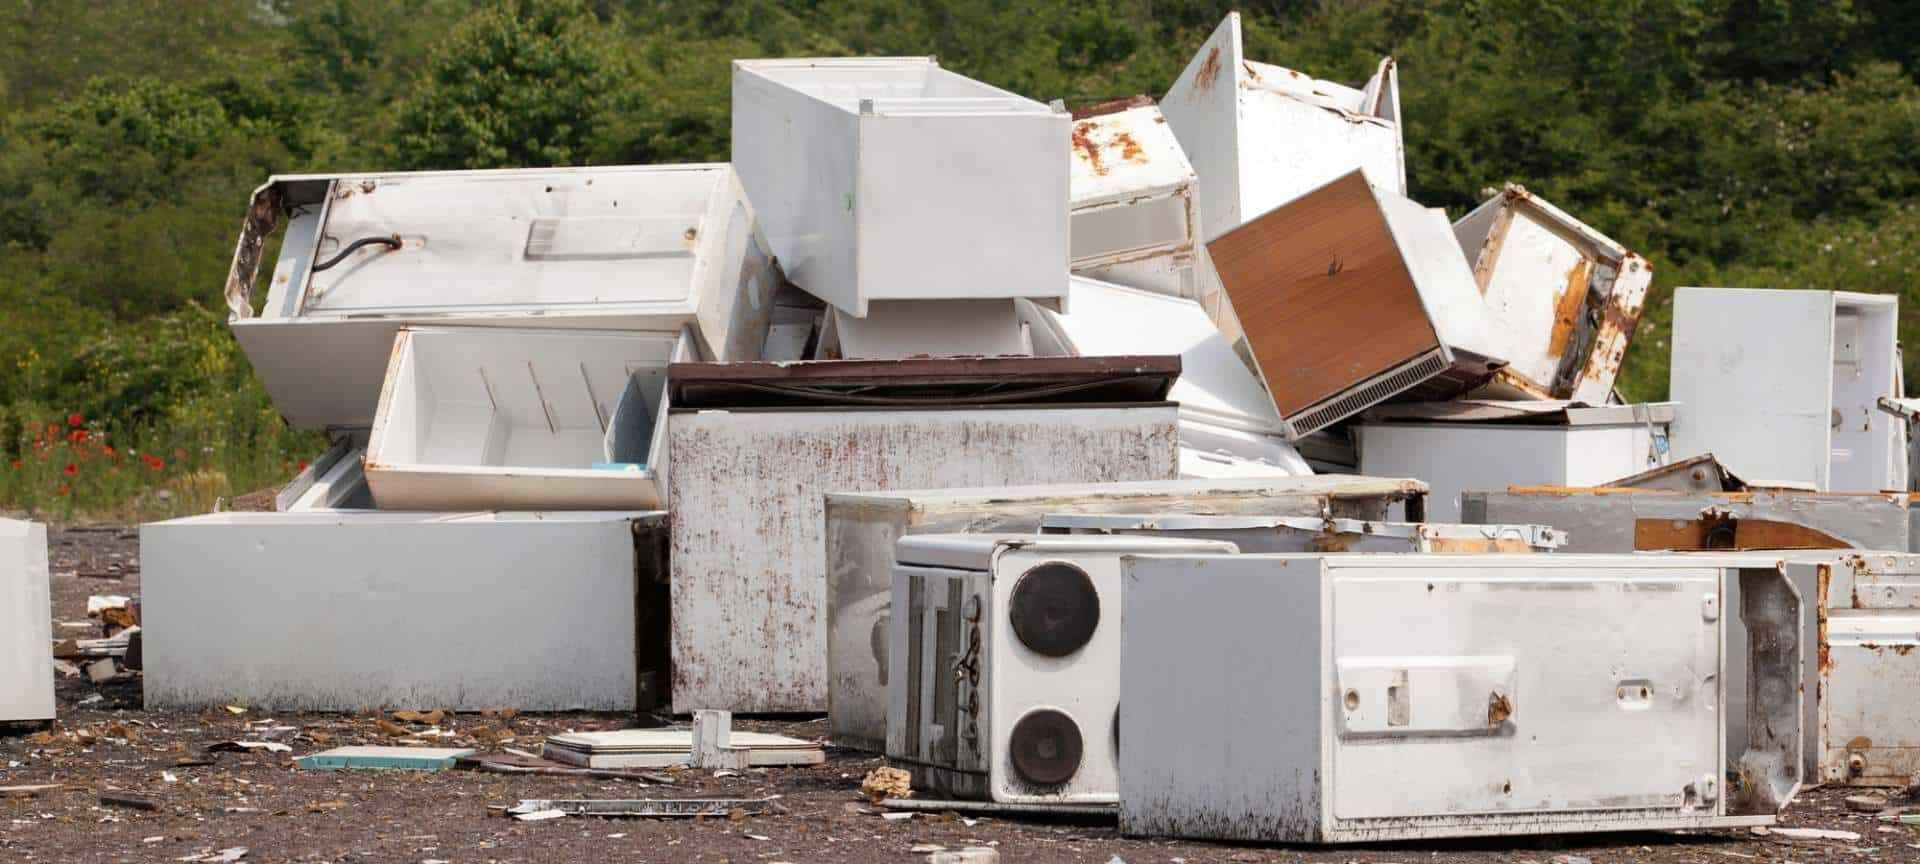 Appliance Removal Portage